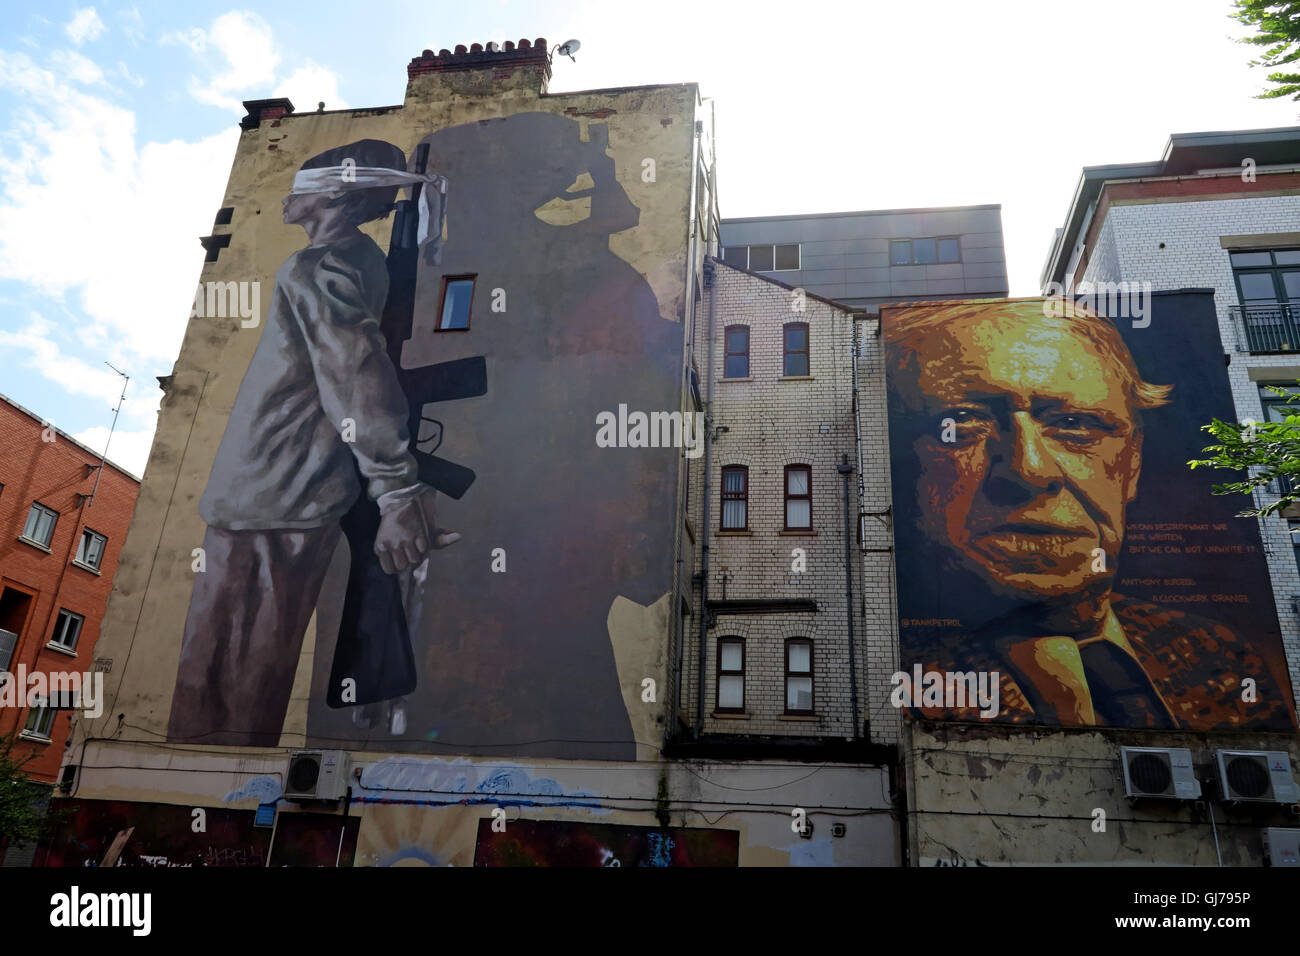 Author Anthony Burgess mural art work, with blindfolded child holding gun, Northern Quarter, Brightwell walk, Manchester M4 5JD Stock Photo